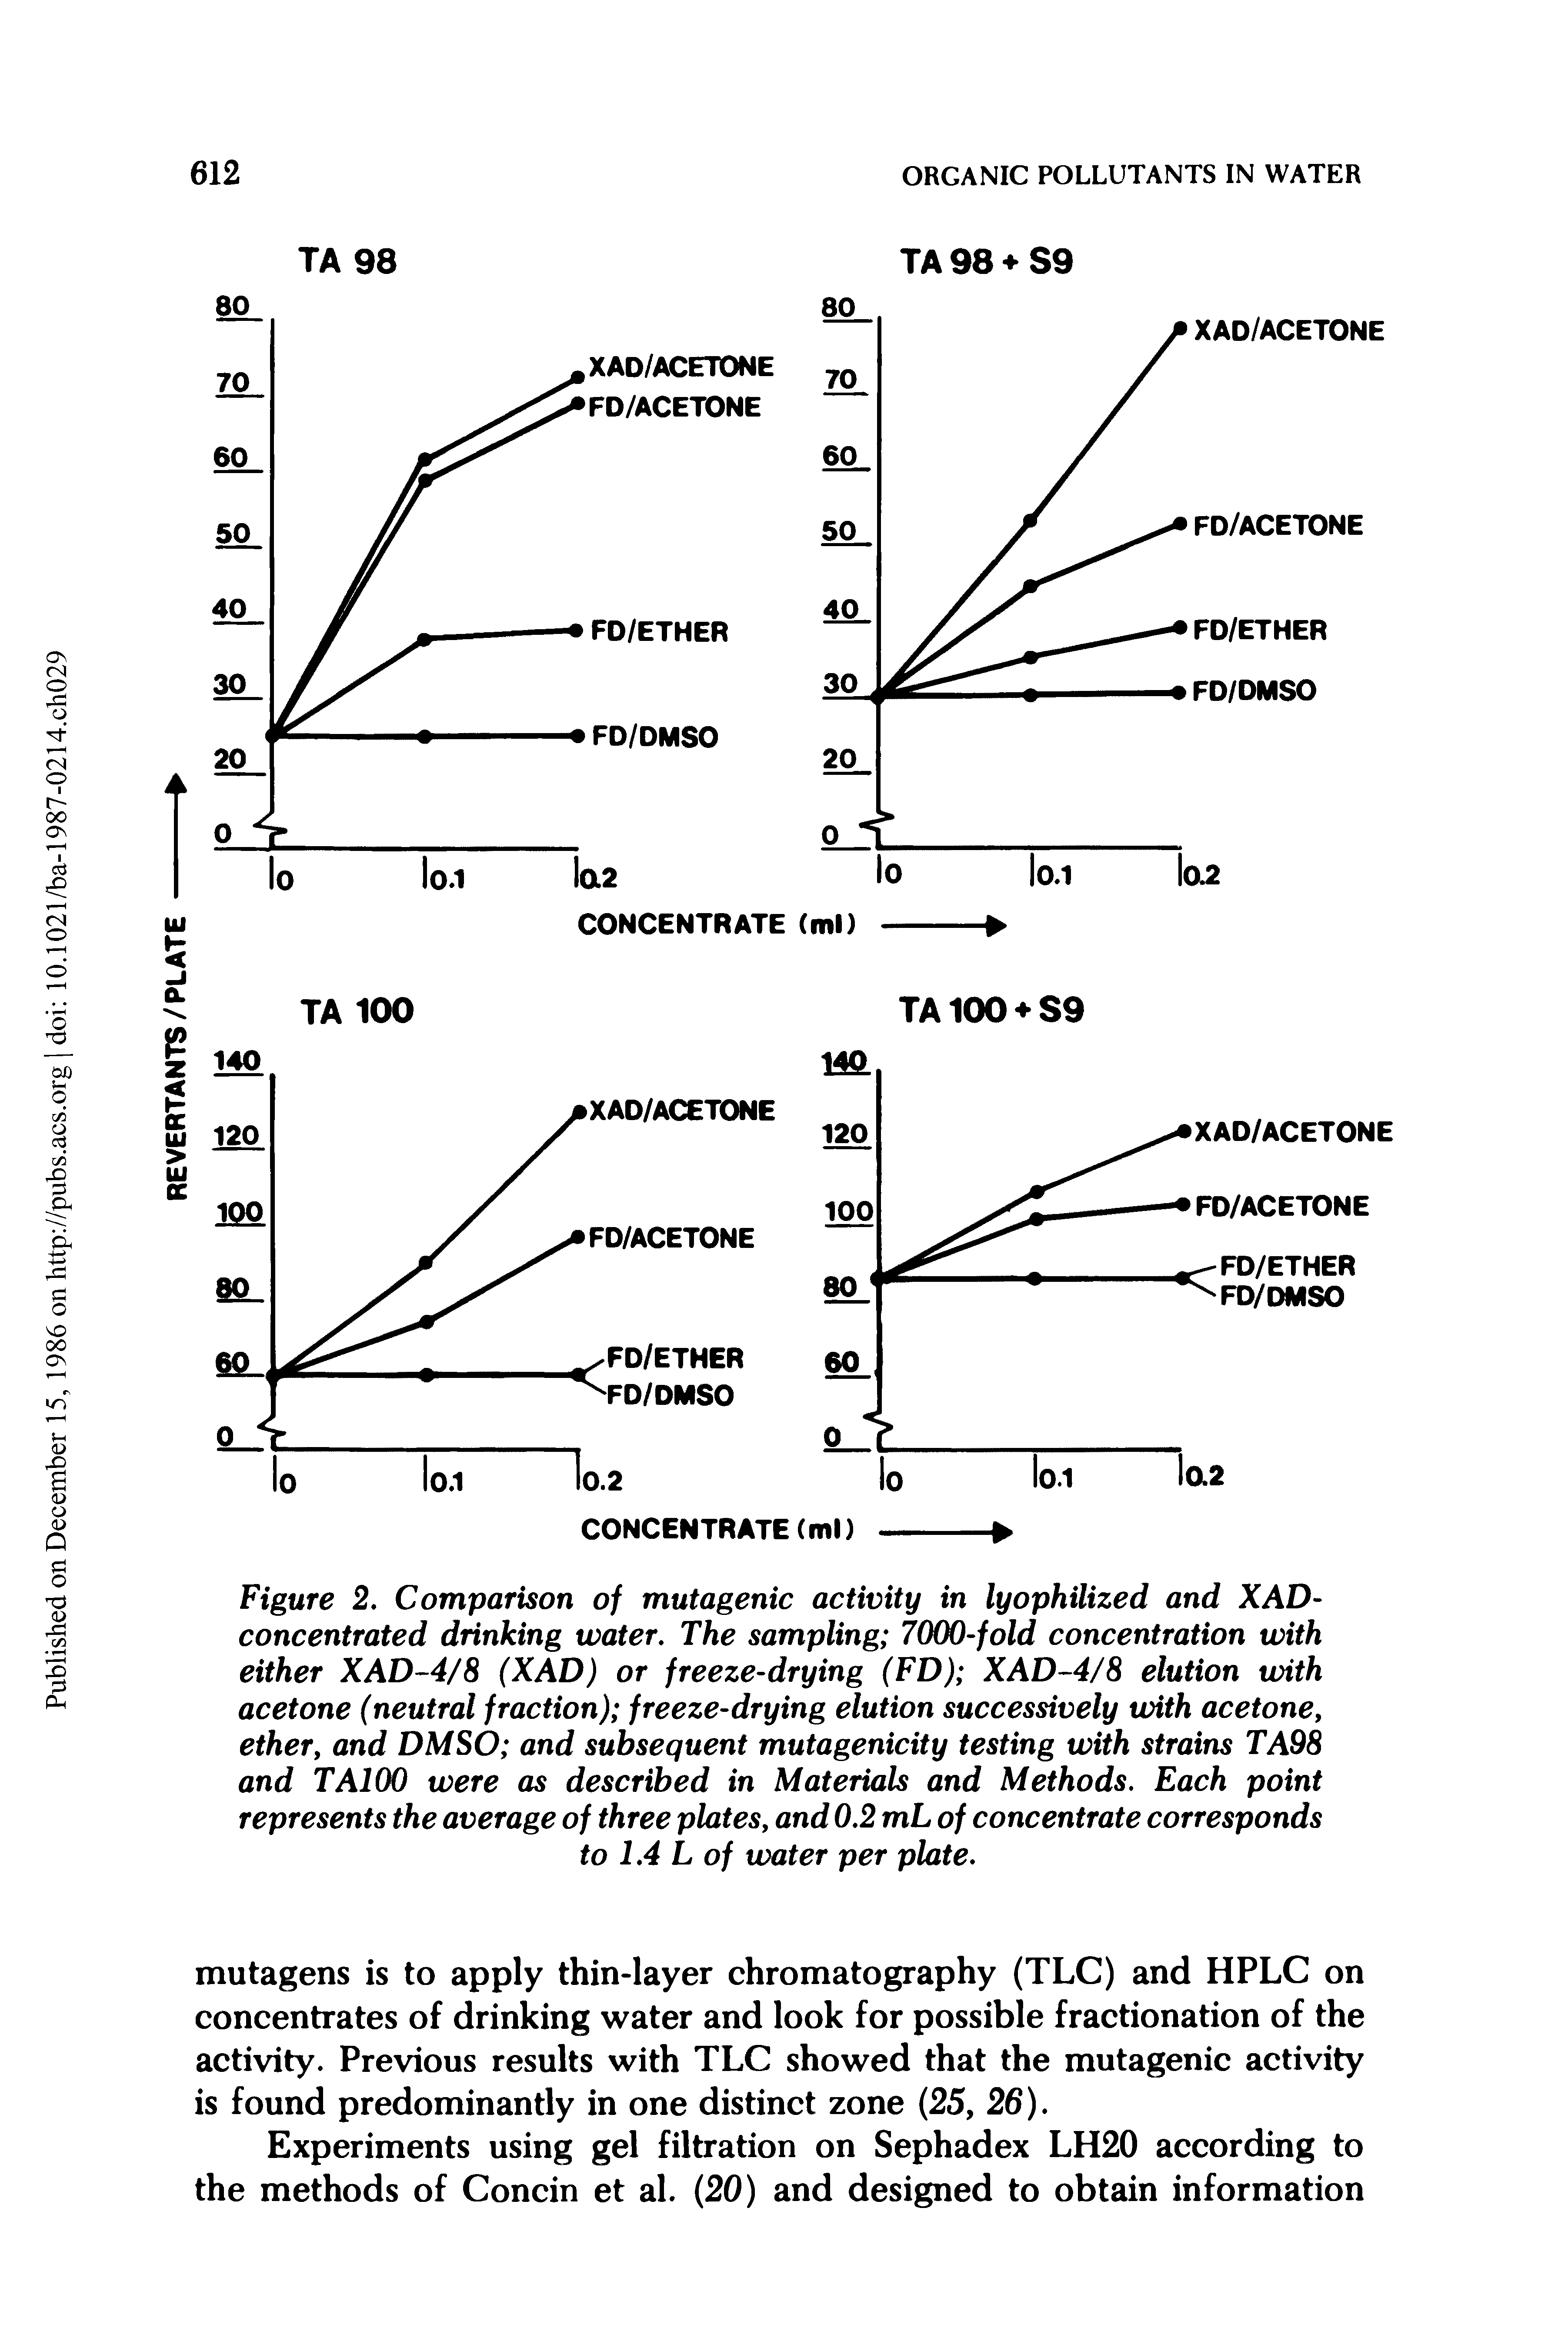 Figure 2. Comparison of mutagenic activity in lyophilized and XAD-concentrated drinking water. The sampling 7000-fold concentration with either XAD-4/8 (XAD) or freeze-drying (FD) XAD-4/8 elution with acetone (neutral fraction) freeze-drying elution successively with acetone, ether, and DM SO and subsequent mutagenicity testing with strains TA98 and TA100 were as described in Materials and Methods. Each point represents the average of three plates, and 0.2 mL of concentrate corresponds to 1.4 L of water per plate.